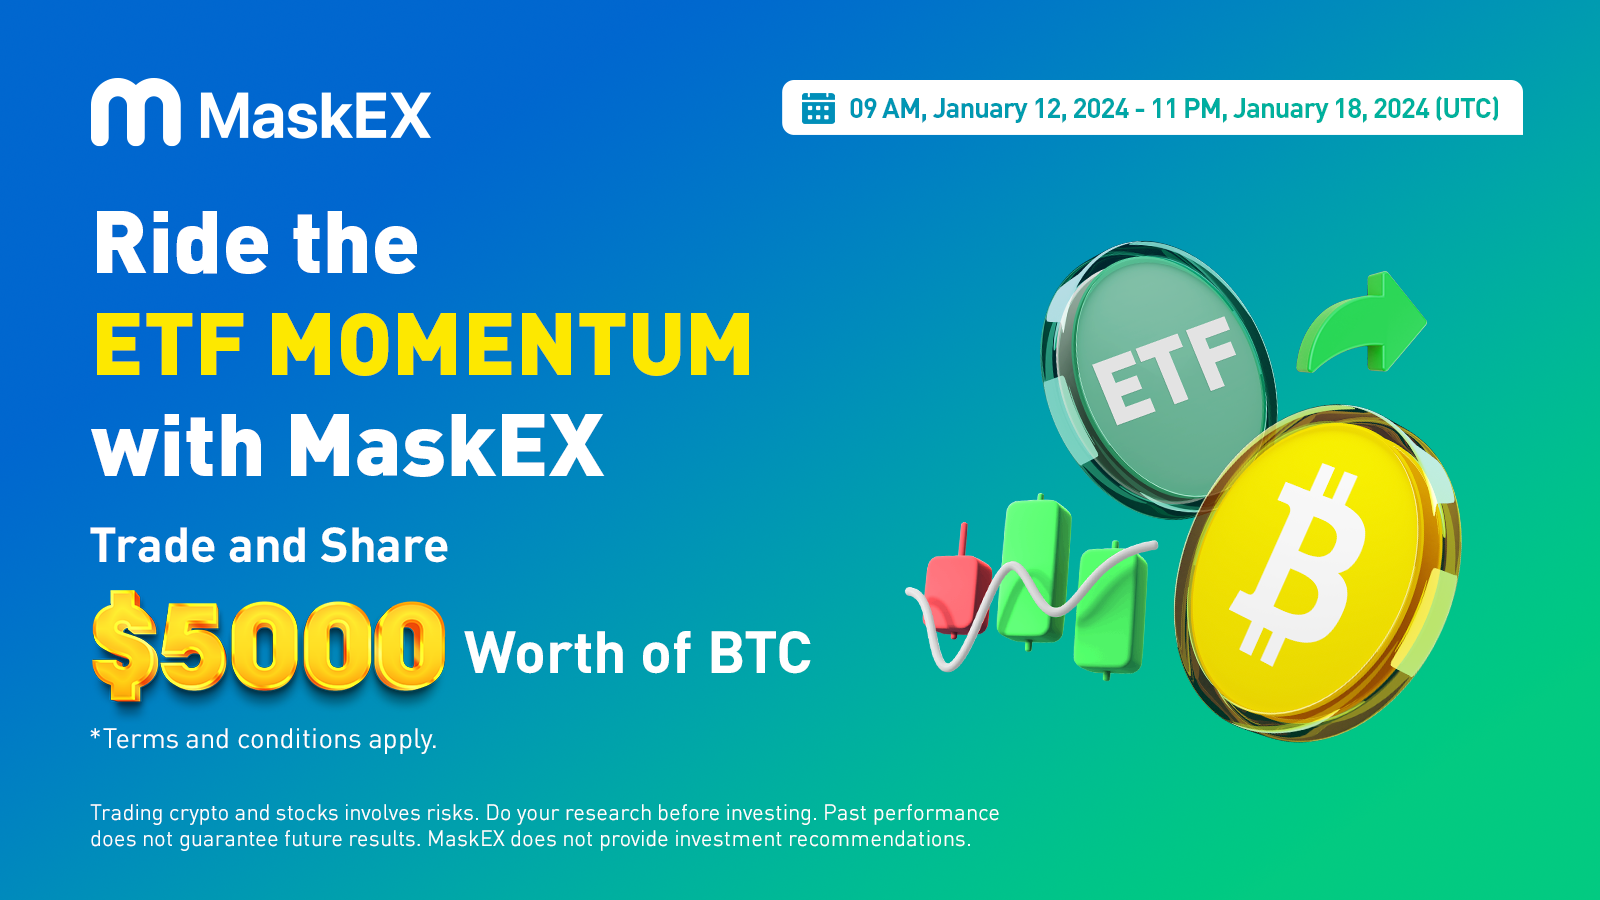 Ride the ETF Momentum with MaskEX: Trade and Share $5000 Worth of BTC